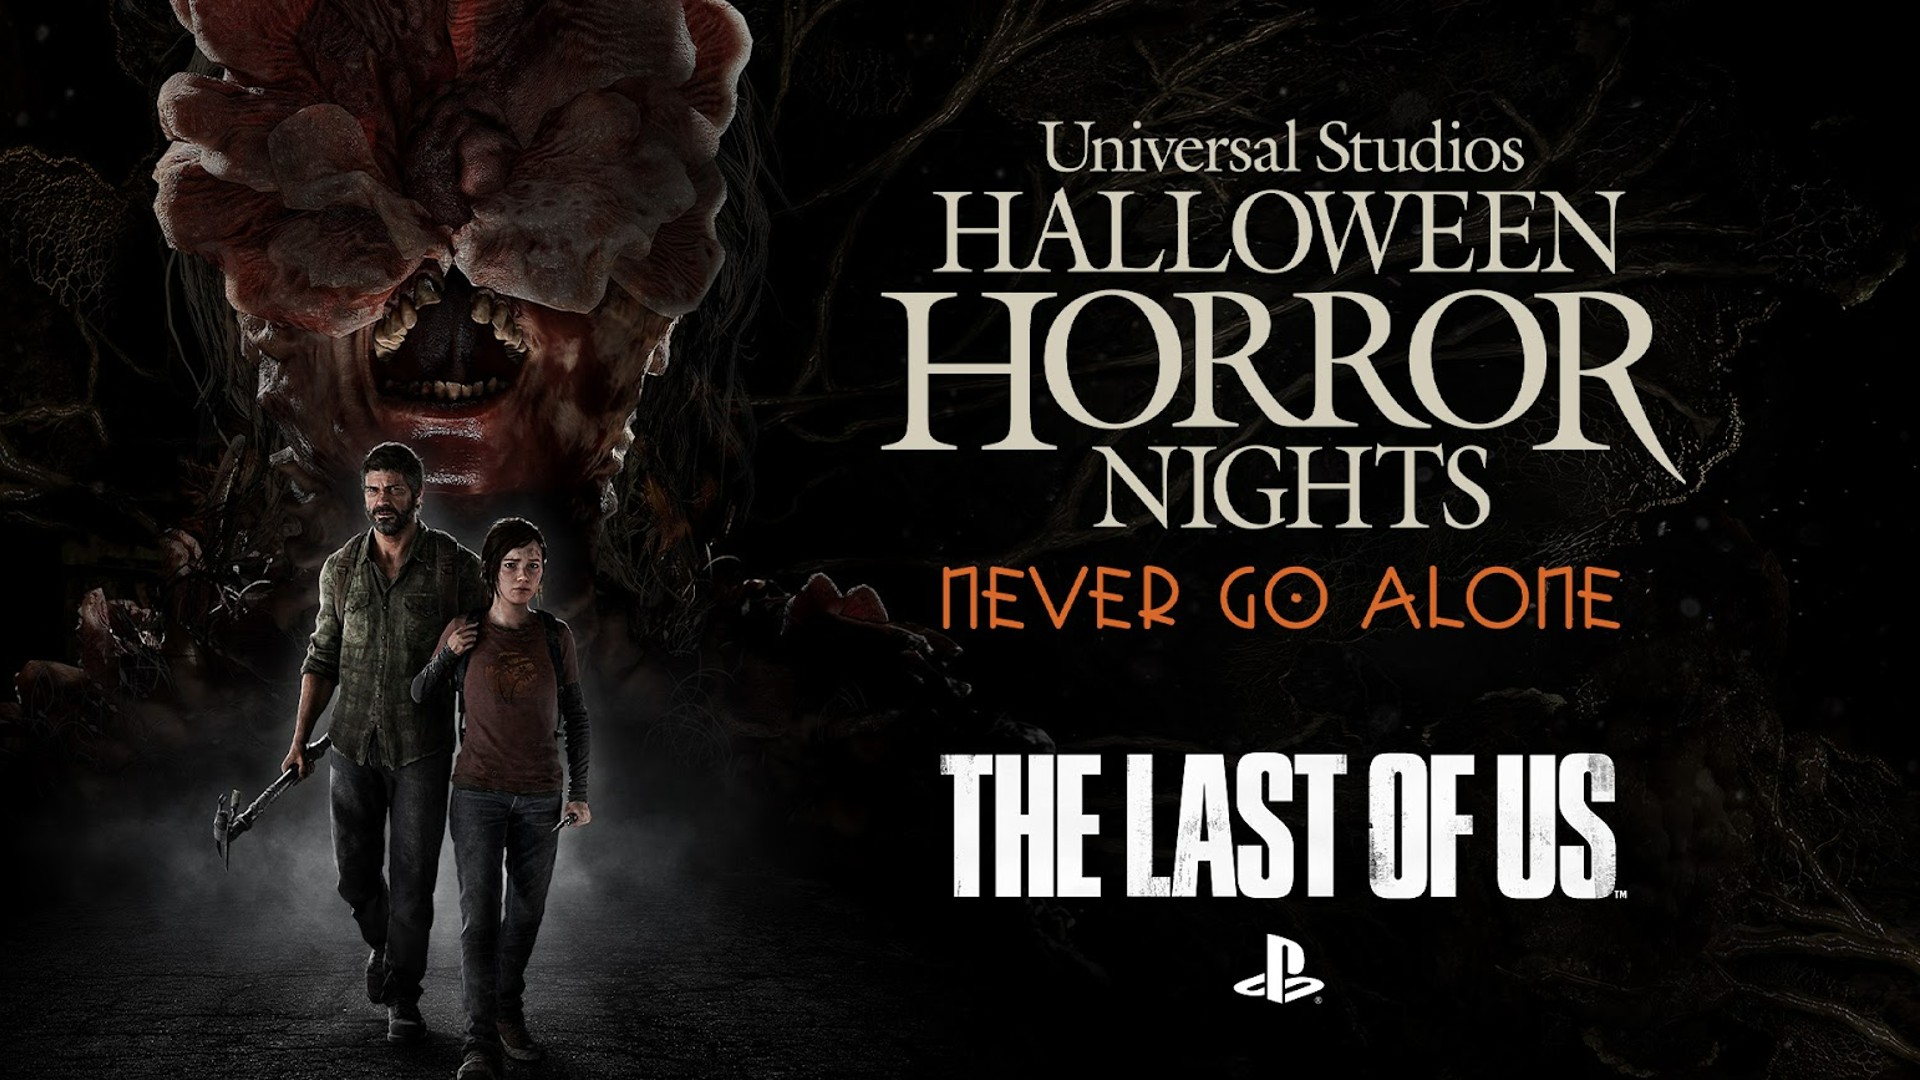 I braved The Last of Us Haunted House at Universal Studios Halloween